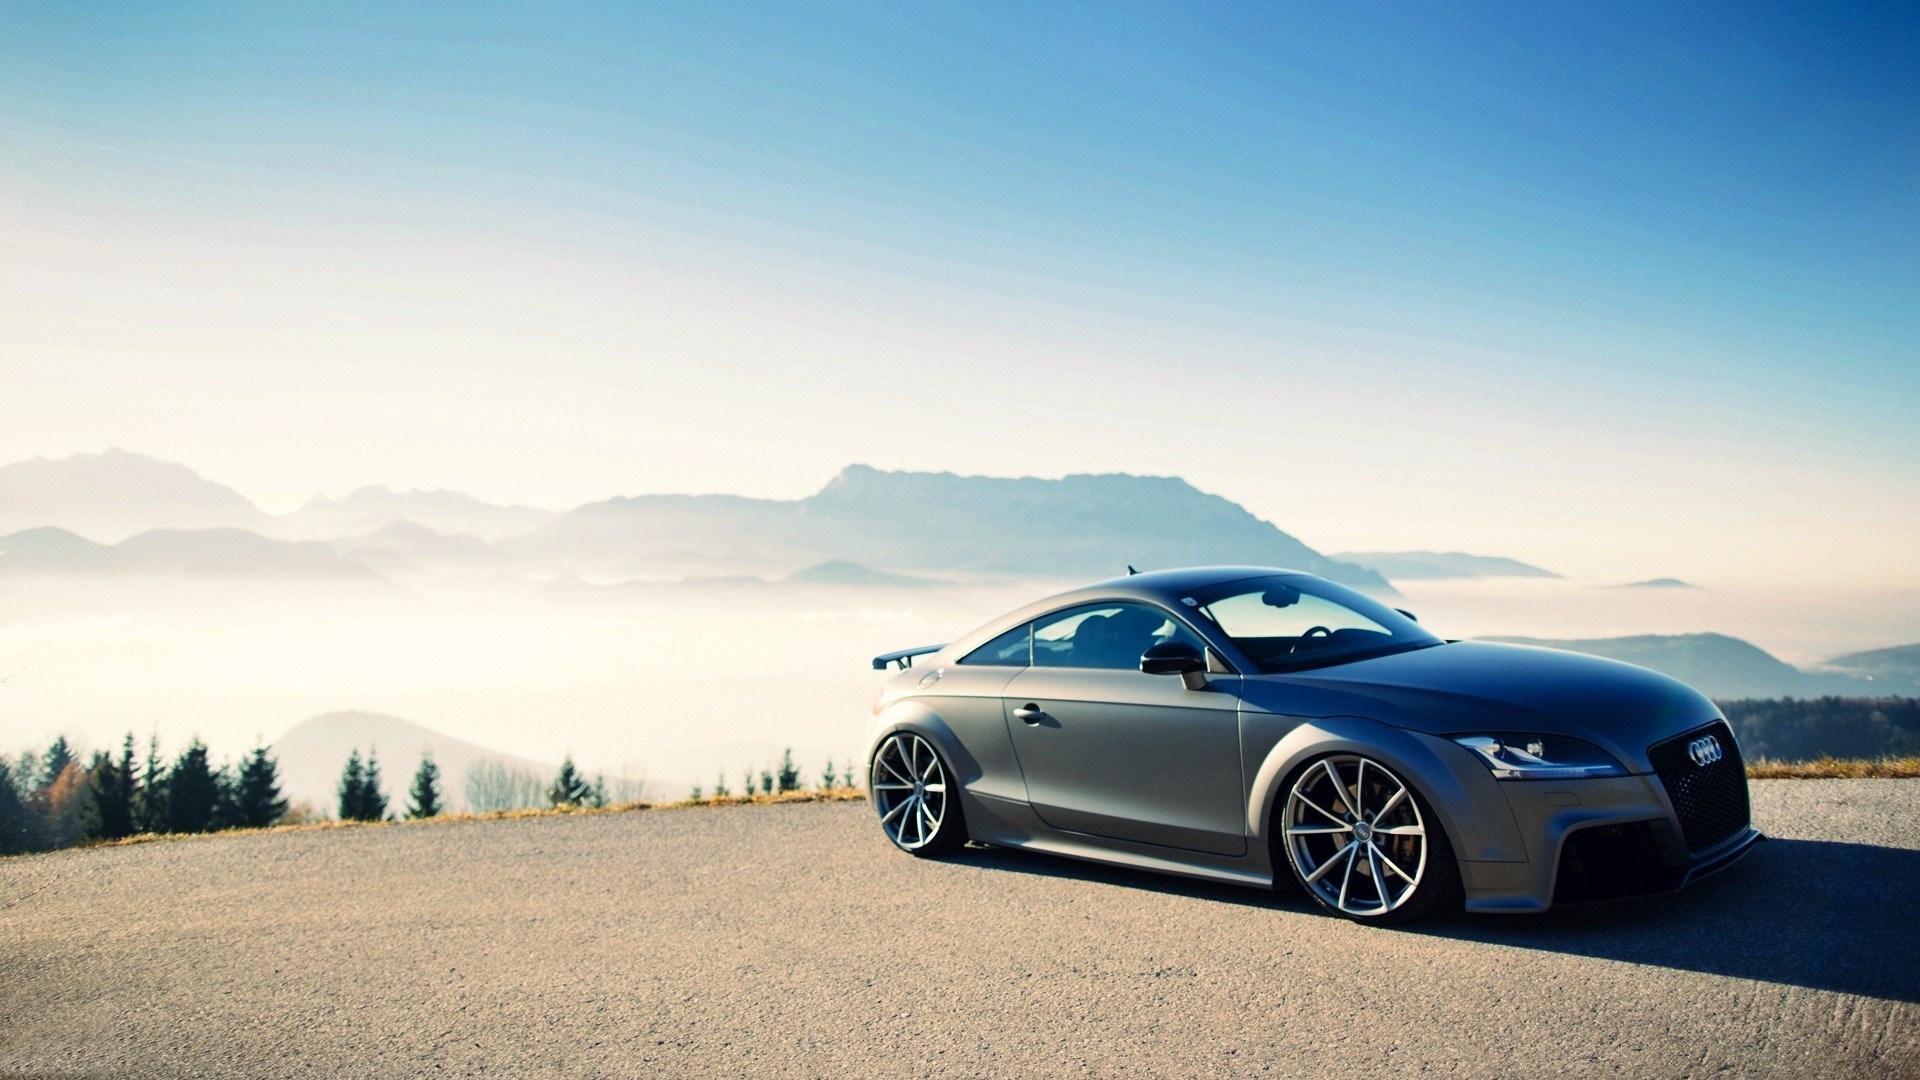 Audi TT Wallpapers Collection 25